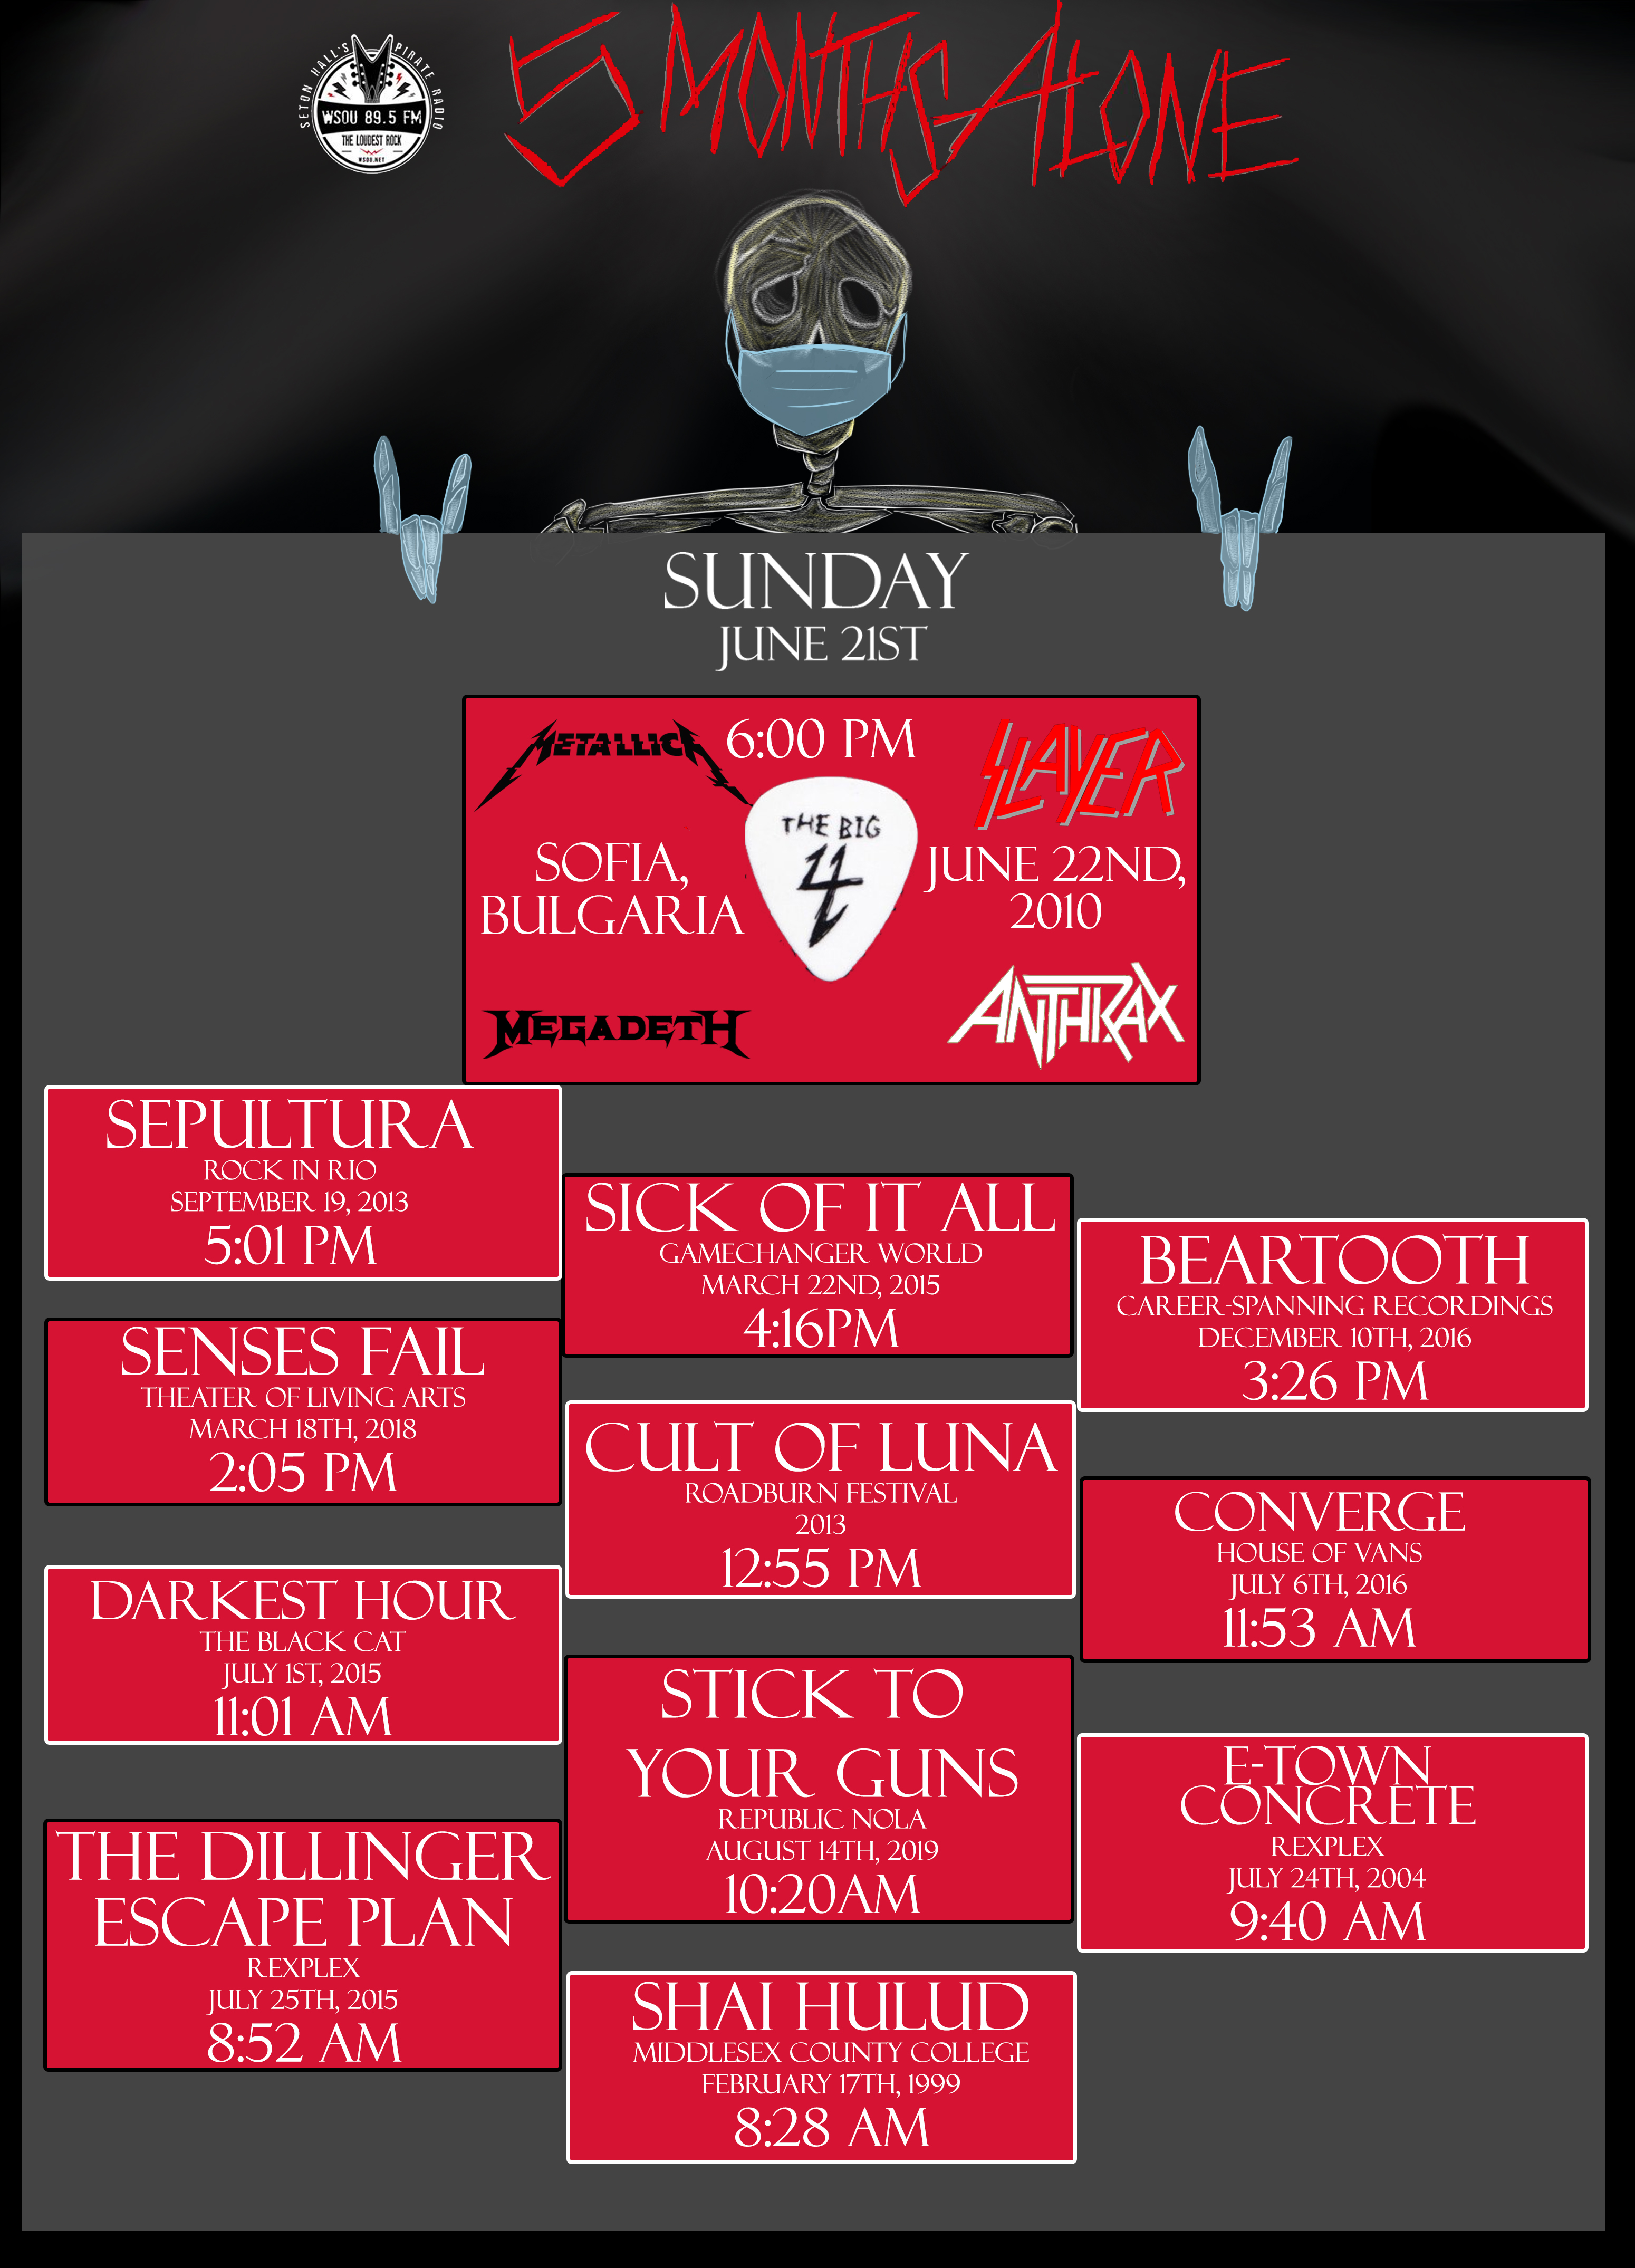 SUNDAY JUNE 21ST METALLICA SLAYER MEGADETH ANTHRAX 6:00 PM SEPULTURA 5:01 PM SICK OF IT ALL 4:16 PM BEARTOOTH 3:26 PM SENSES FAIL 2:05 PM CULT OF LUNA 12:55 PM COVERGE 11:53 AM DARKEST HOUR 11:01 AM STICK TO YOUR GUNS 10:20 AM AND MORE!